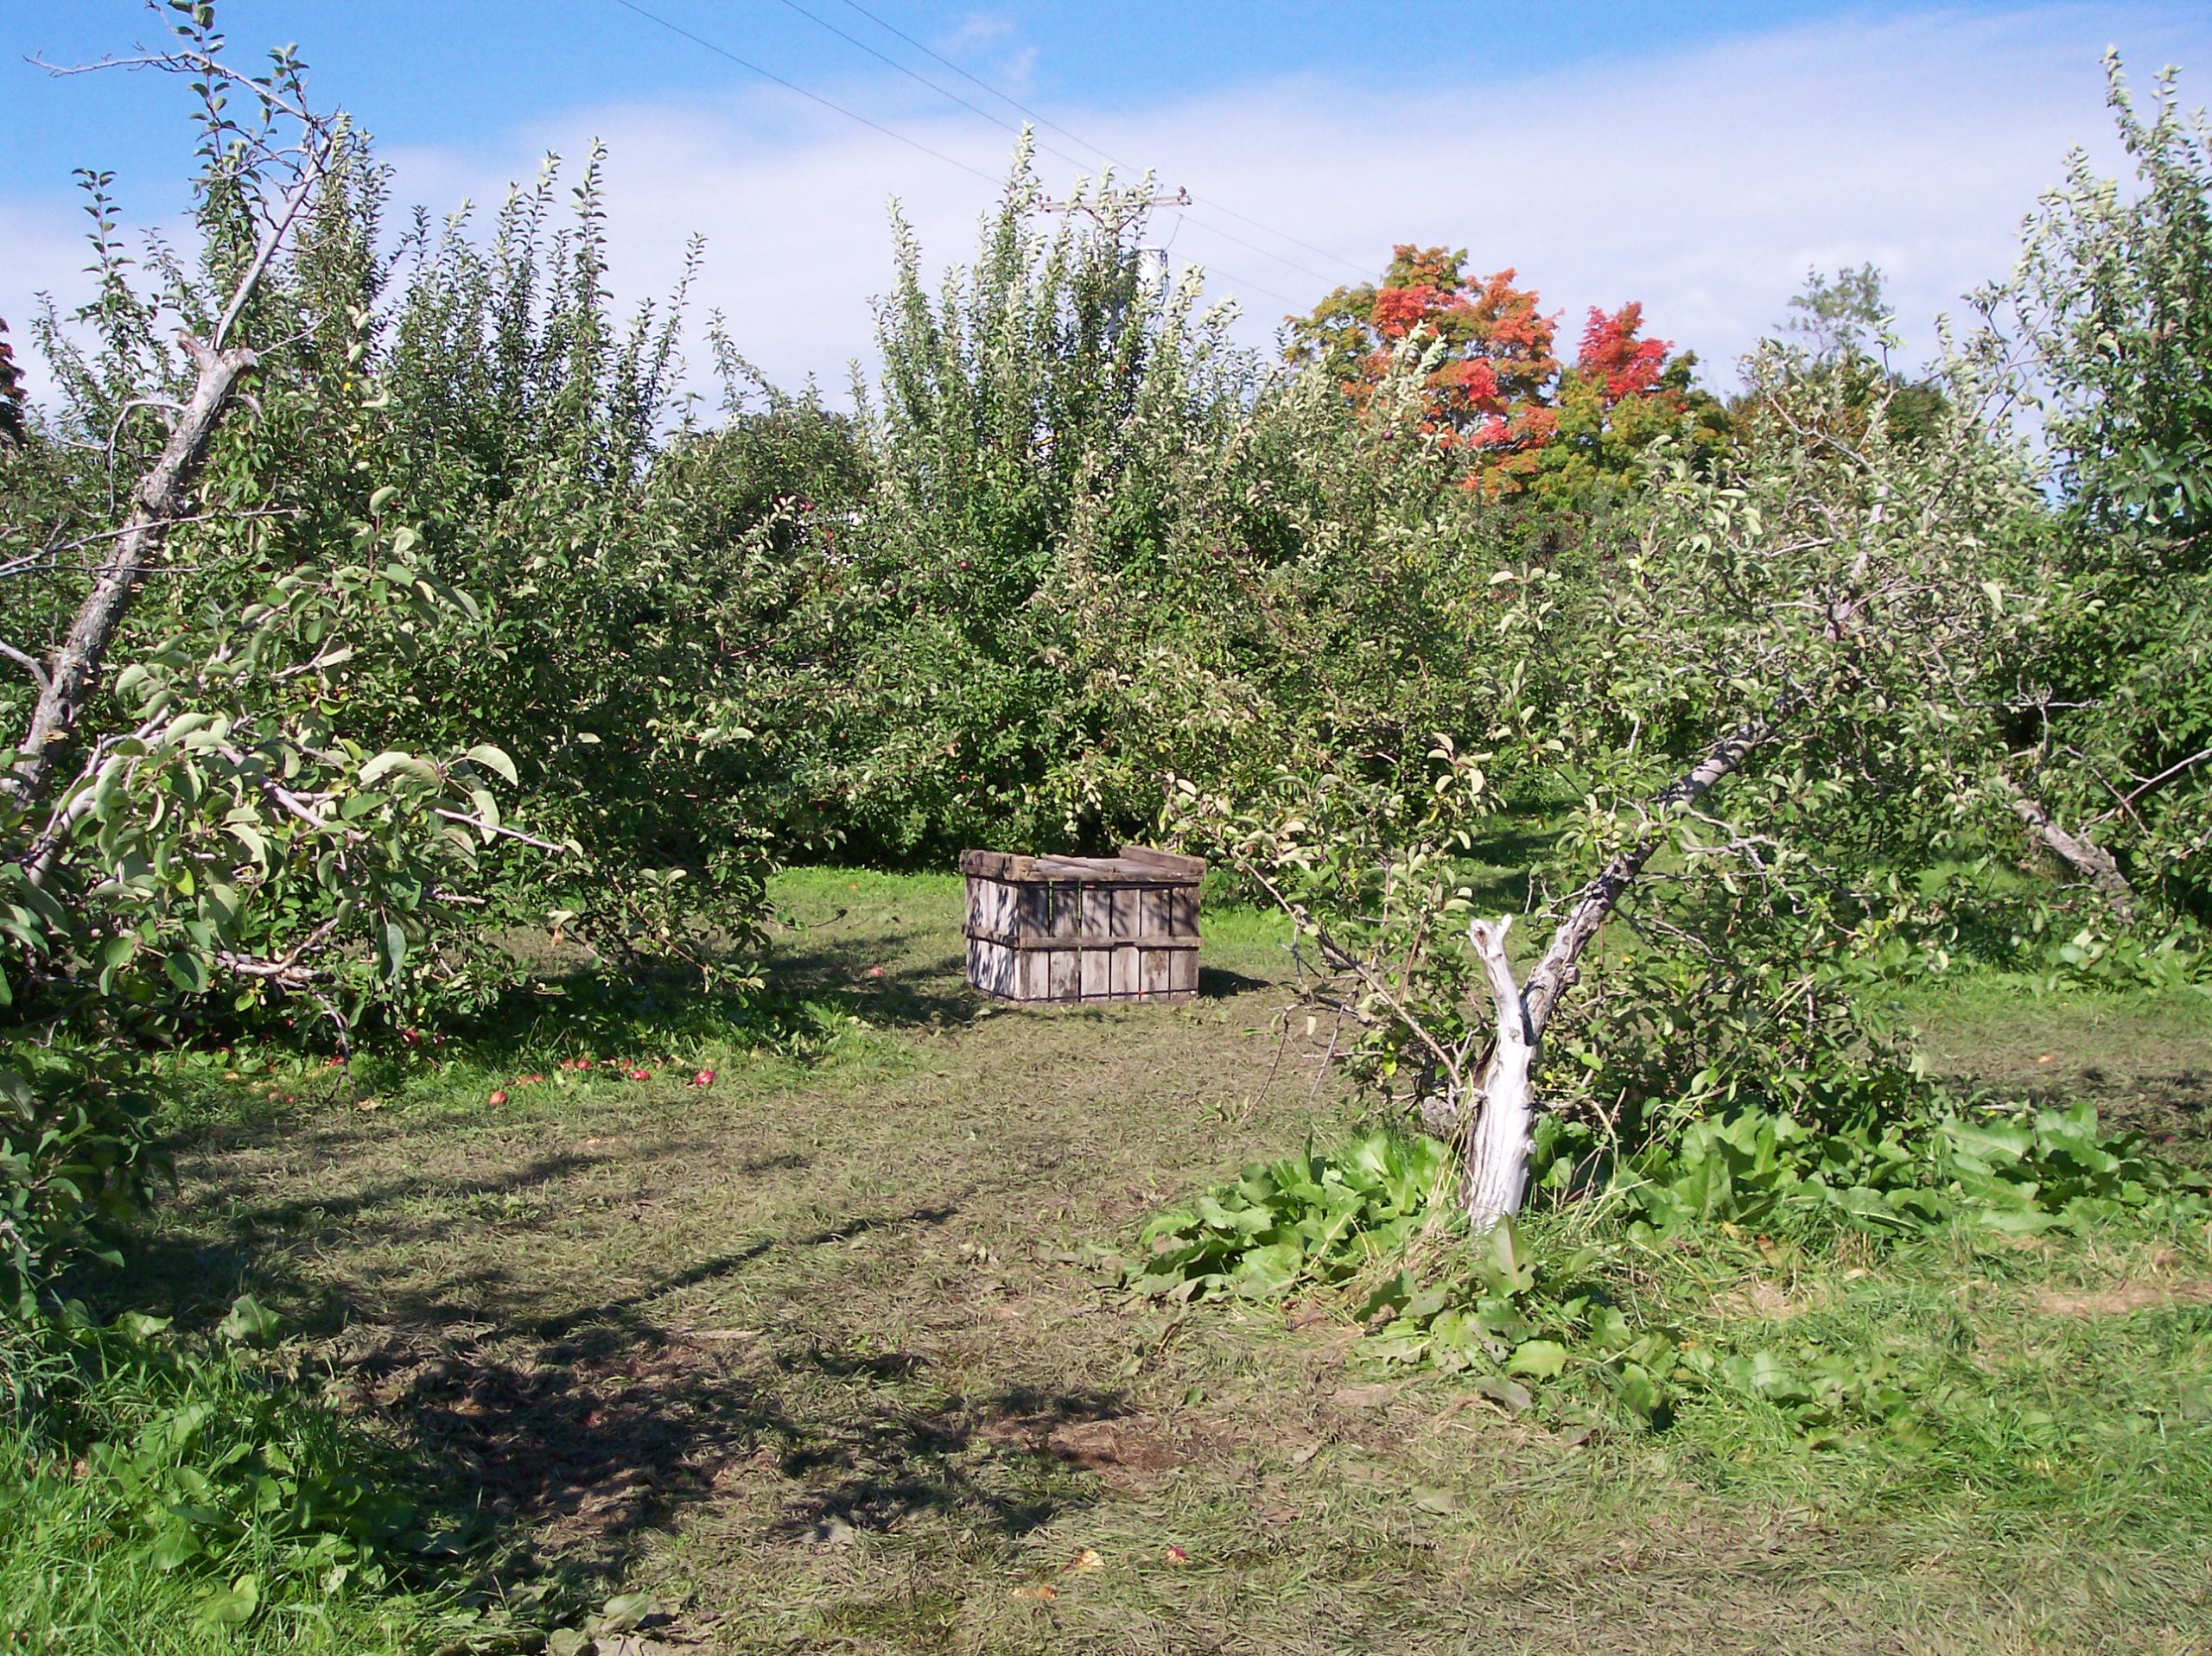 Applecrest Orchard (user submitted)